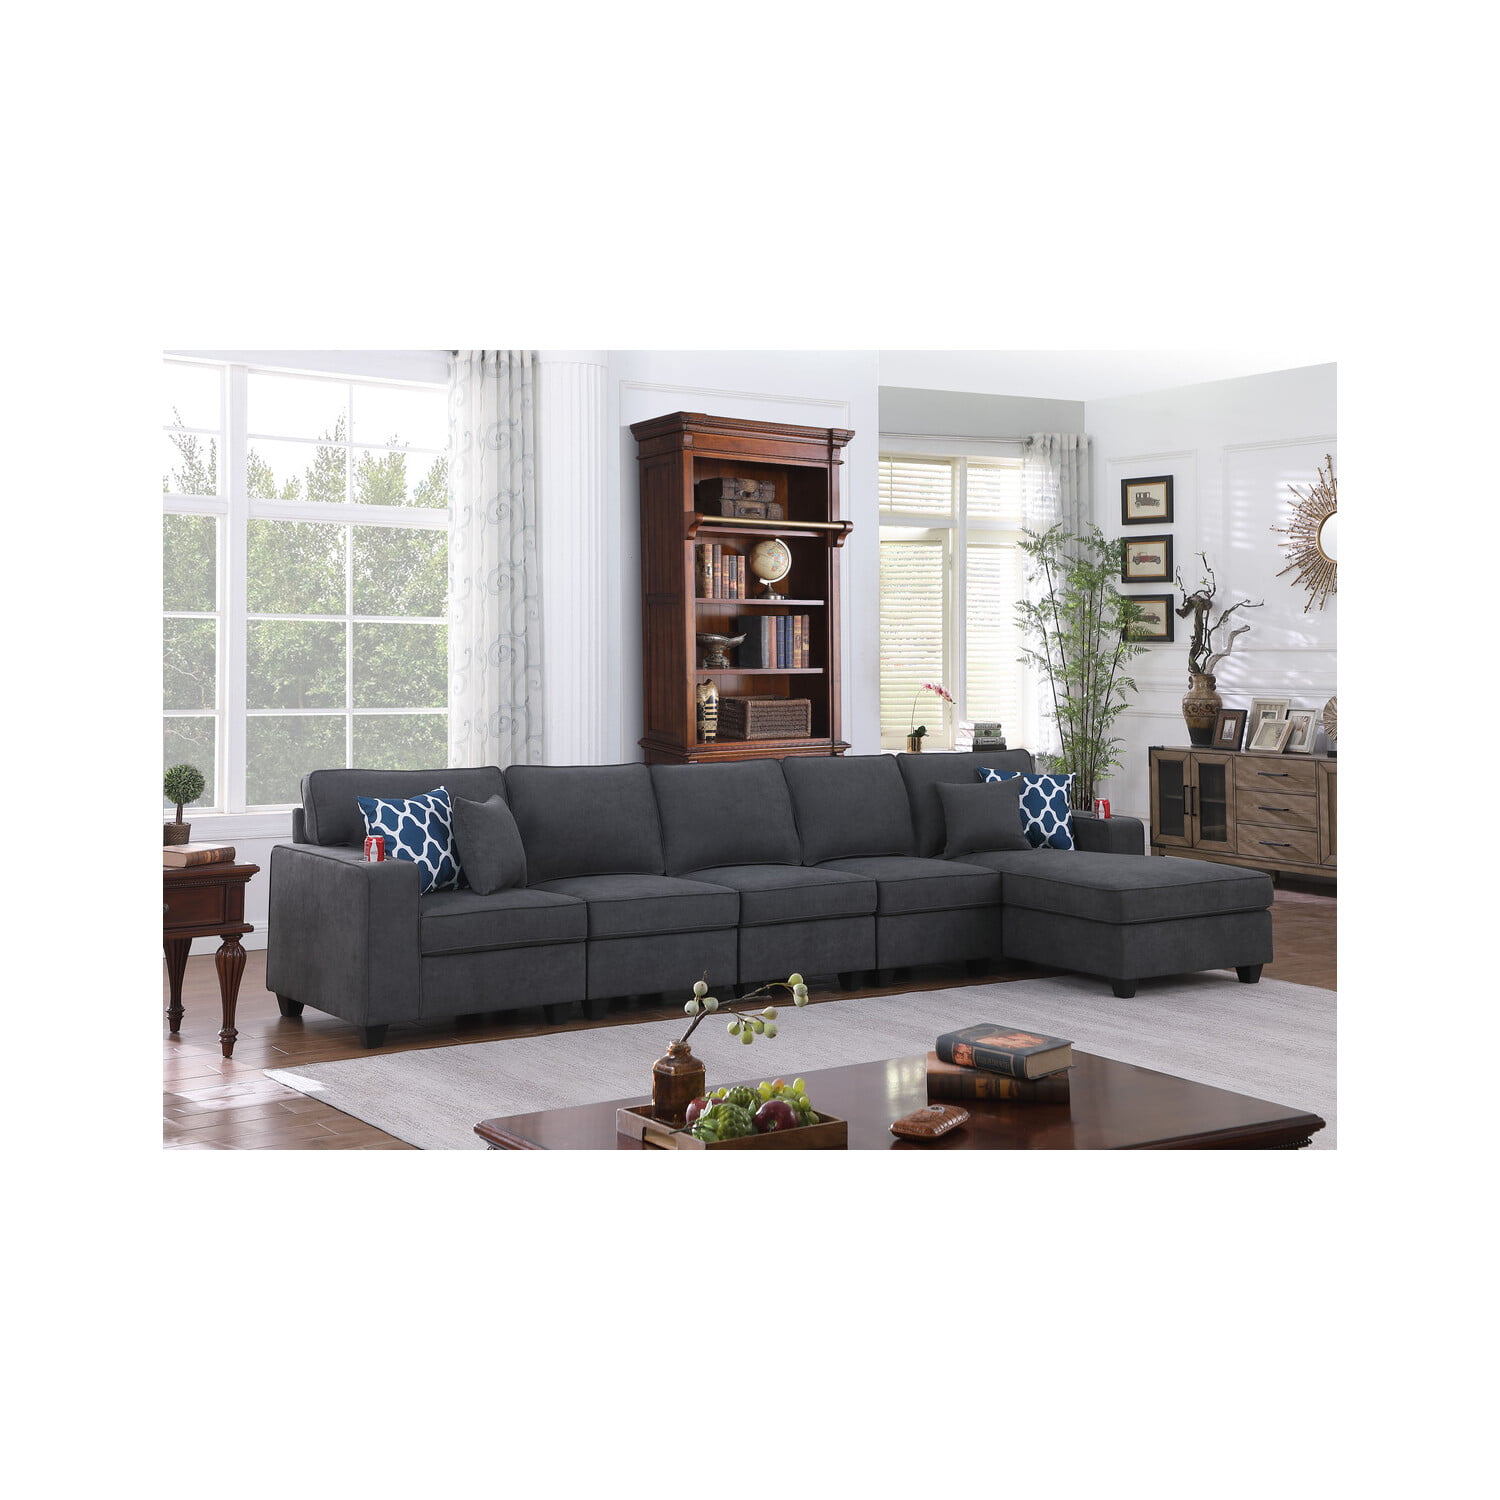 Lilola Home Cooper 5Pc Sectional Sofa Chaise with Cupholder-Color